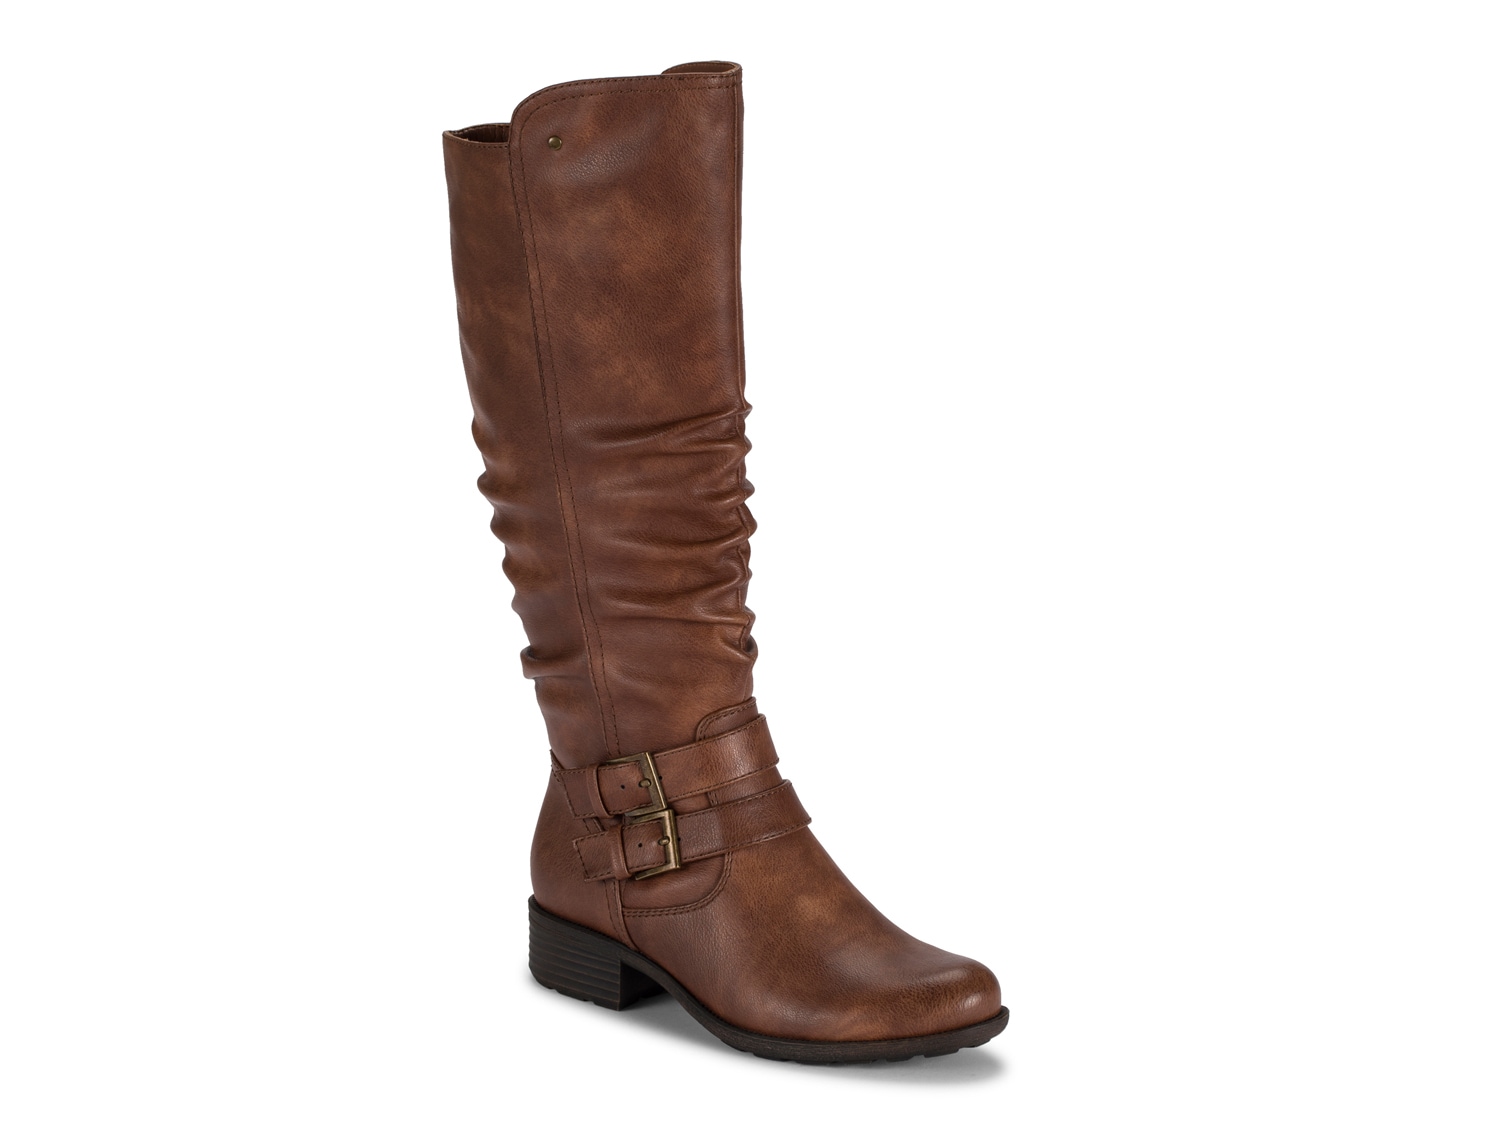 Baretraps Partay Wide Calf Riding Boot - Free Shipping | DSW